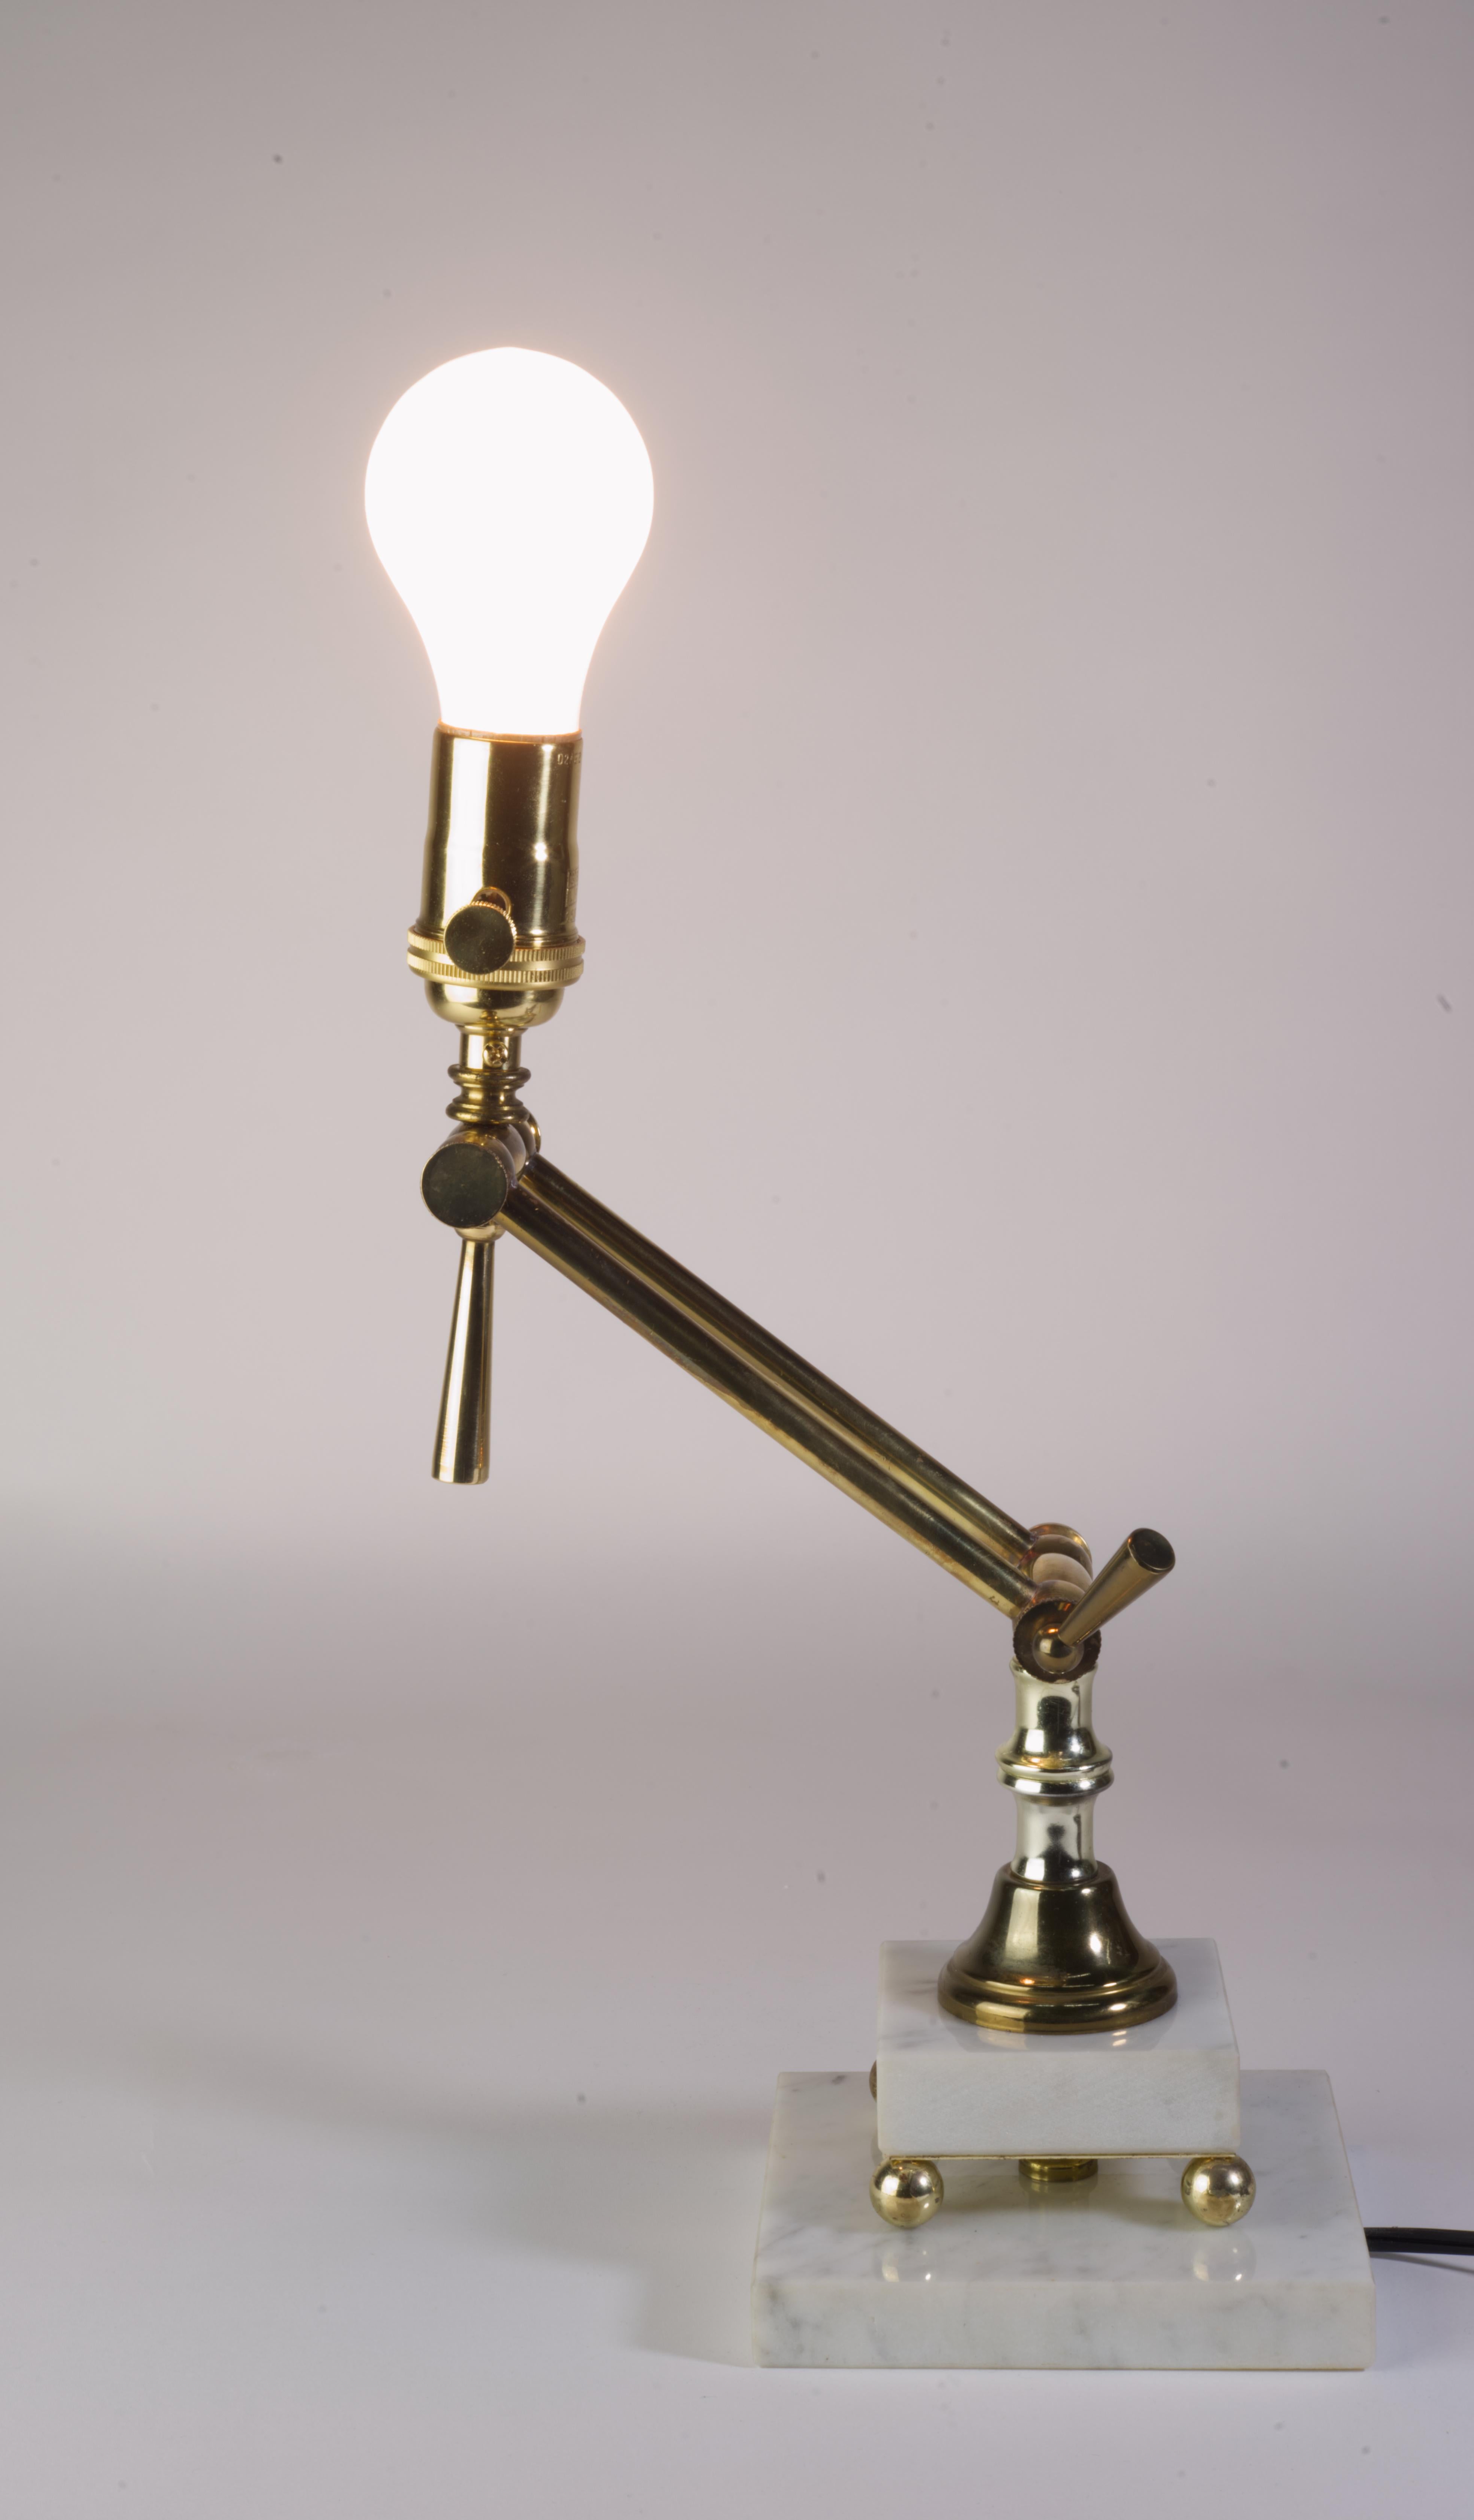 Adjustable Brass and Marble Table lamp from 1970s.
Marble has no damages. Brass has some patina. All joints work well. 
Shade has couple of small dings. If you are planning on using your own shade, lamp can be shipped for less. 